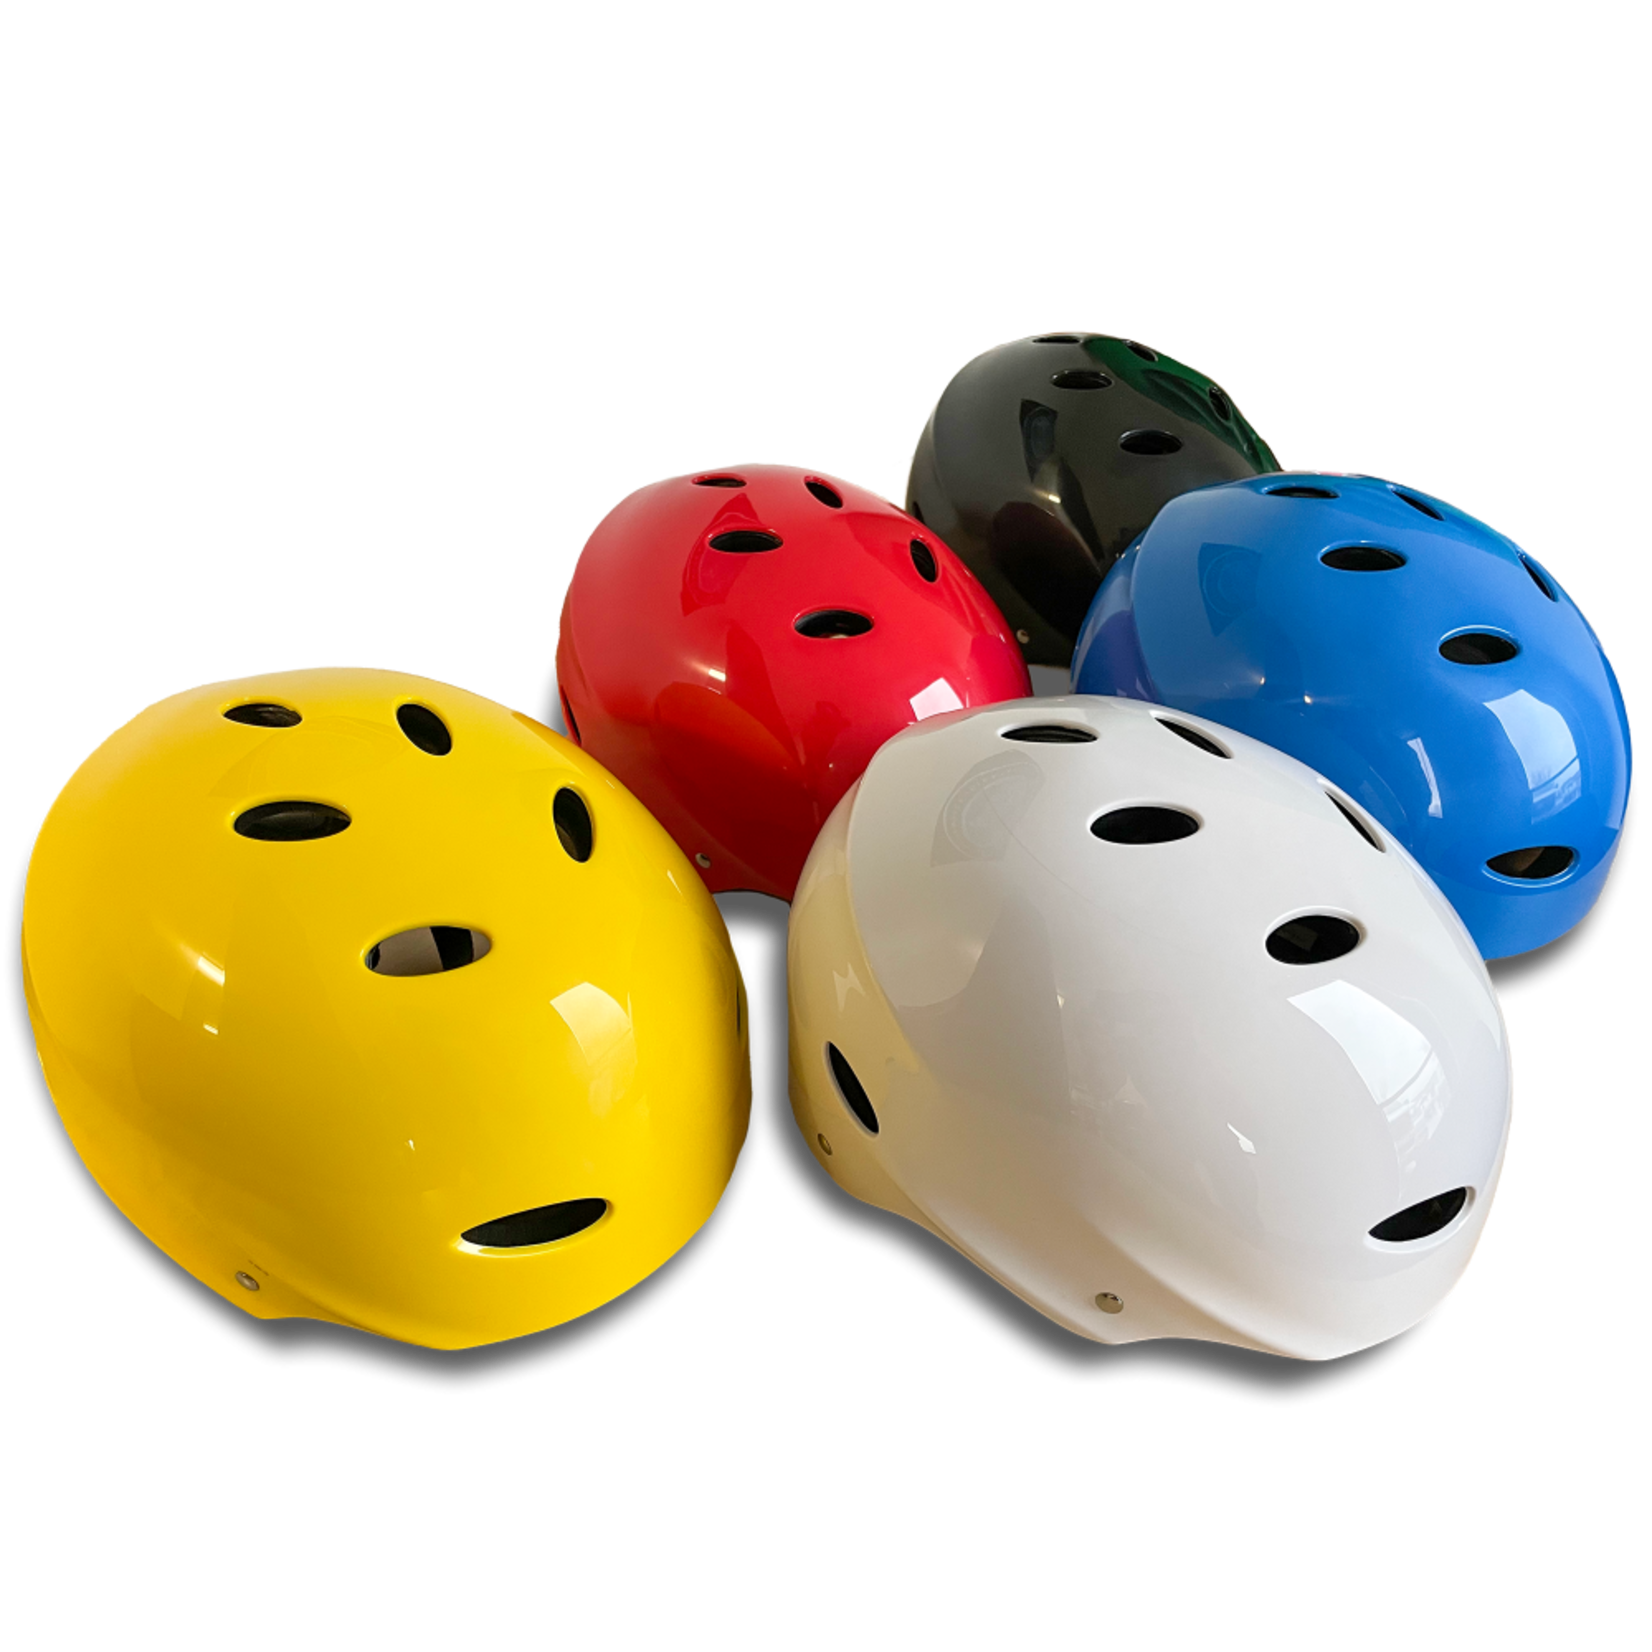 Hyside Inflatables Hyside PRO CE Helmet